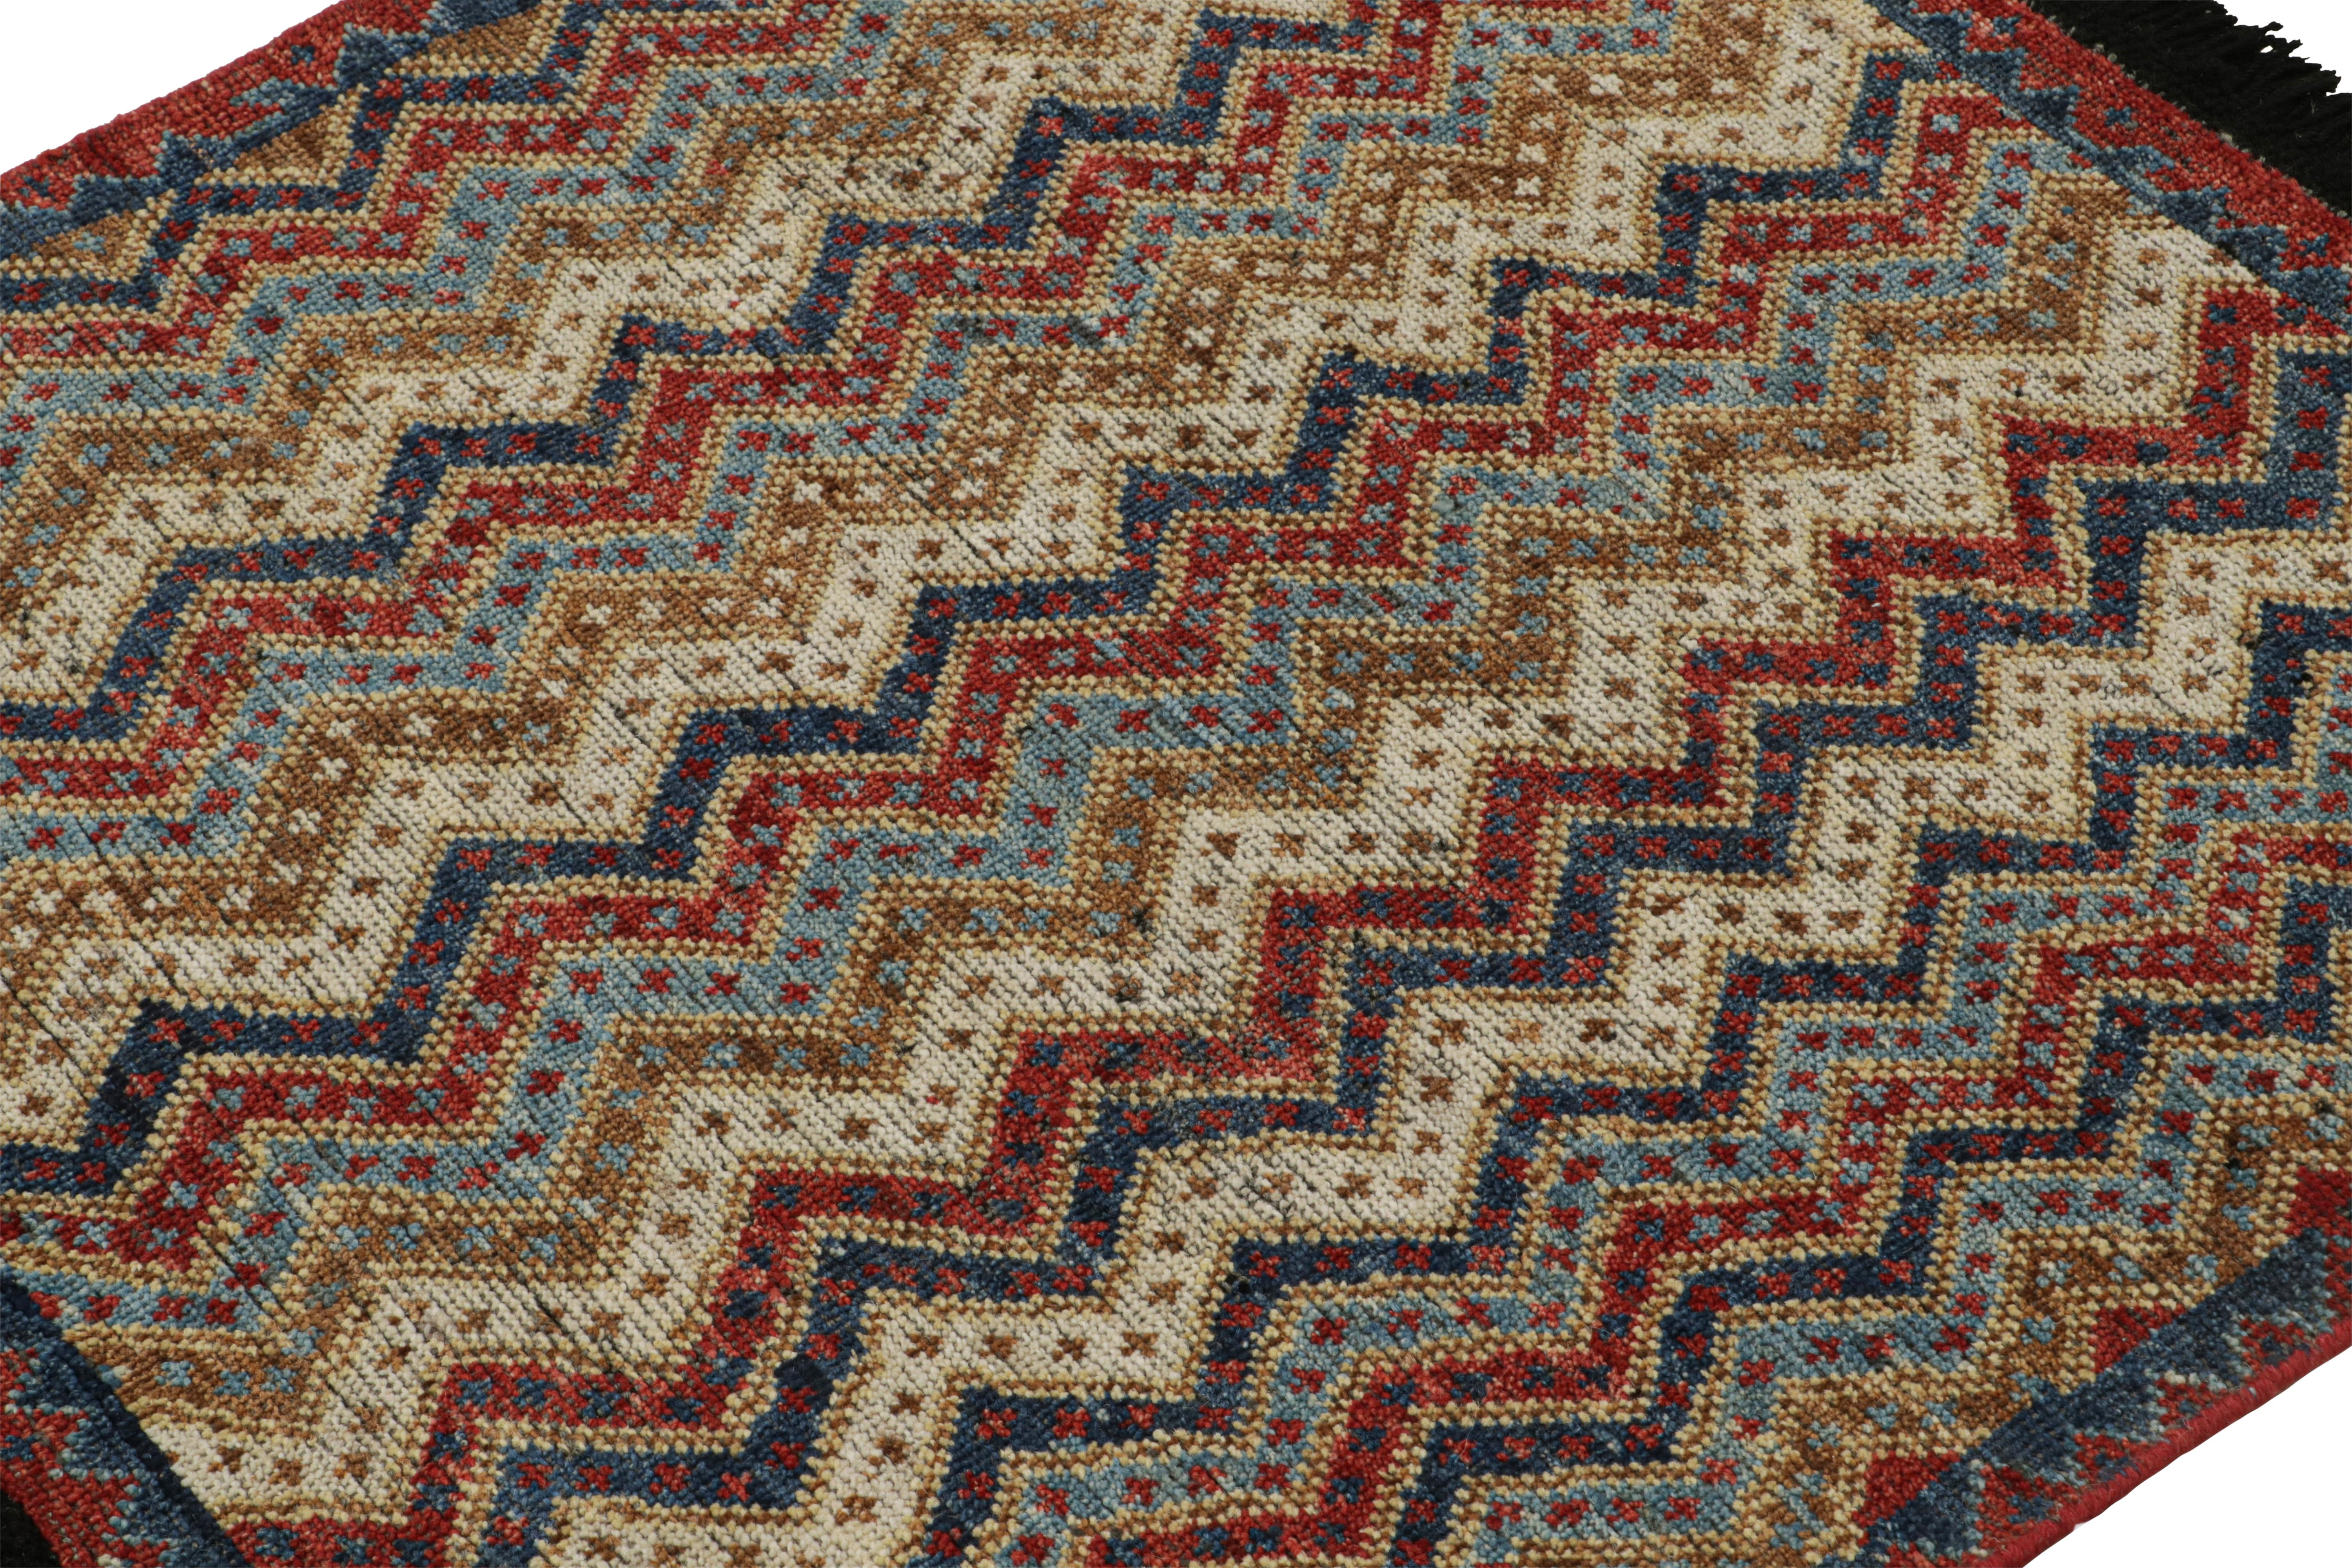 Hand-Knotted Rug & Kilim’s Antique Tribal Style rug in Red, Blue, Brown & White Patterns For Sale